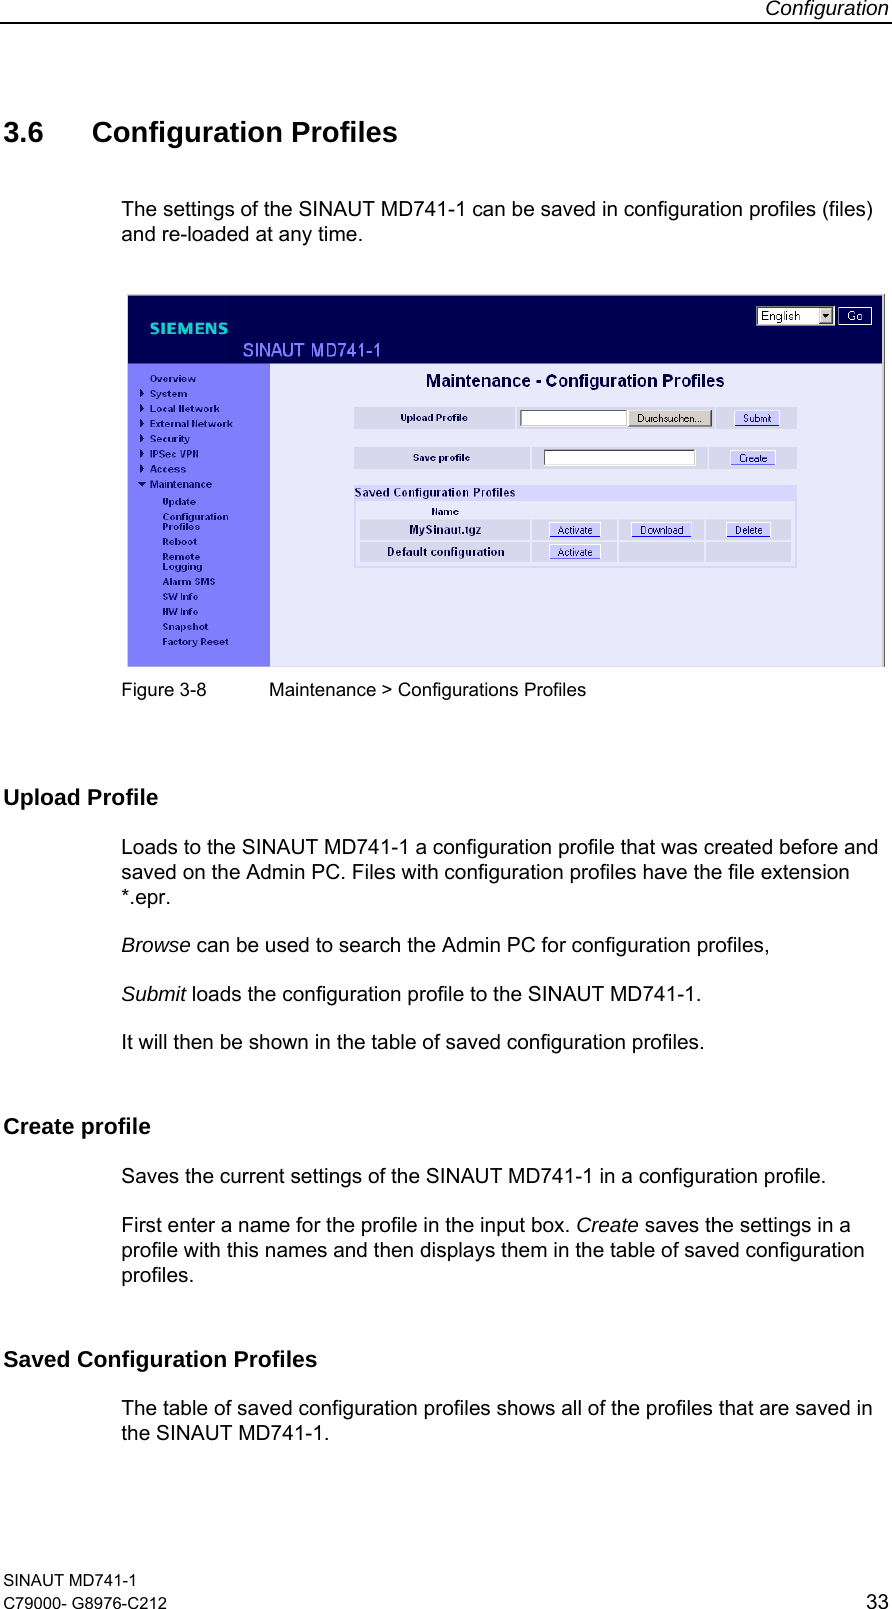 Configuration SINAUT MD741-1 C79000- G8976-C212  33  3.6 Configuration Profiles The settings of the SINAUT MD741-1 can be saved in configuration profiles (files) and re-loaded at any time.    Figure 3-8  Maintenance &gt; Configurations Profiles  Upload Profile Loads to the SINAUT MD741-1 a configuration profile that was created before and saved on the Admin PC. Files with configuration profiles have the file extension *.epr.  Browse can be used to search the Admin PC for configuration profiles,  Submit loads the configuration profile to the SINAUT MD741-1. It will then be shown in the table of saved configuration profiles. Create profile Saves the current settings of the SINAUT MD741-1 in a configuration profile.  First enter a name for the profile in the input box. Create saves the settings in a profile with this names and then displays them in the table of saved configuration profiles. Saved Configuration Profiles The table of saved configuration profiles shows all of the profiles that are saved in the SINAUT MD741-1. 